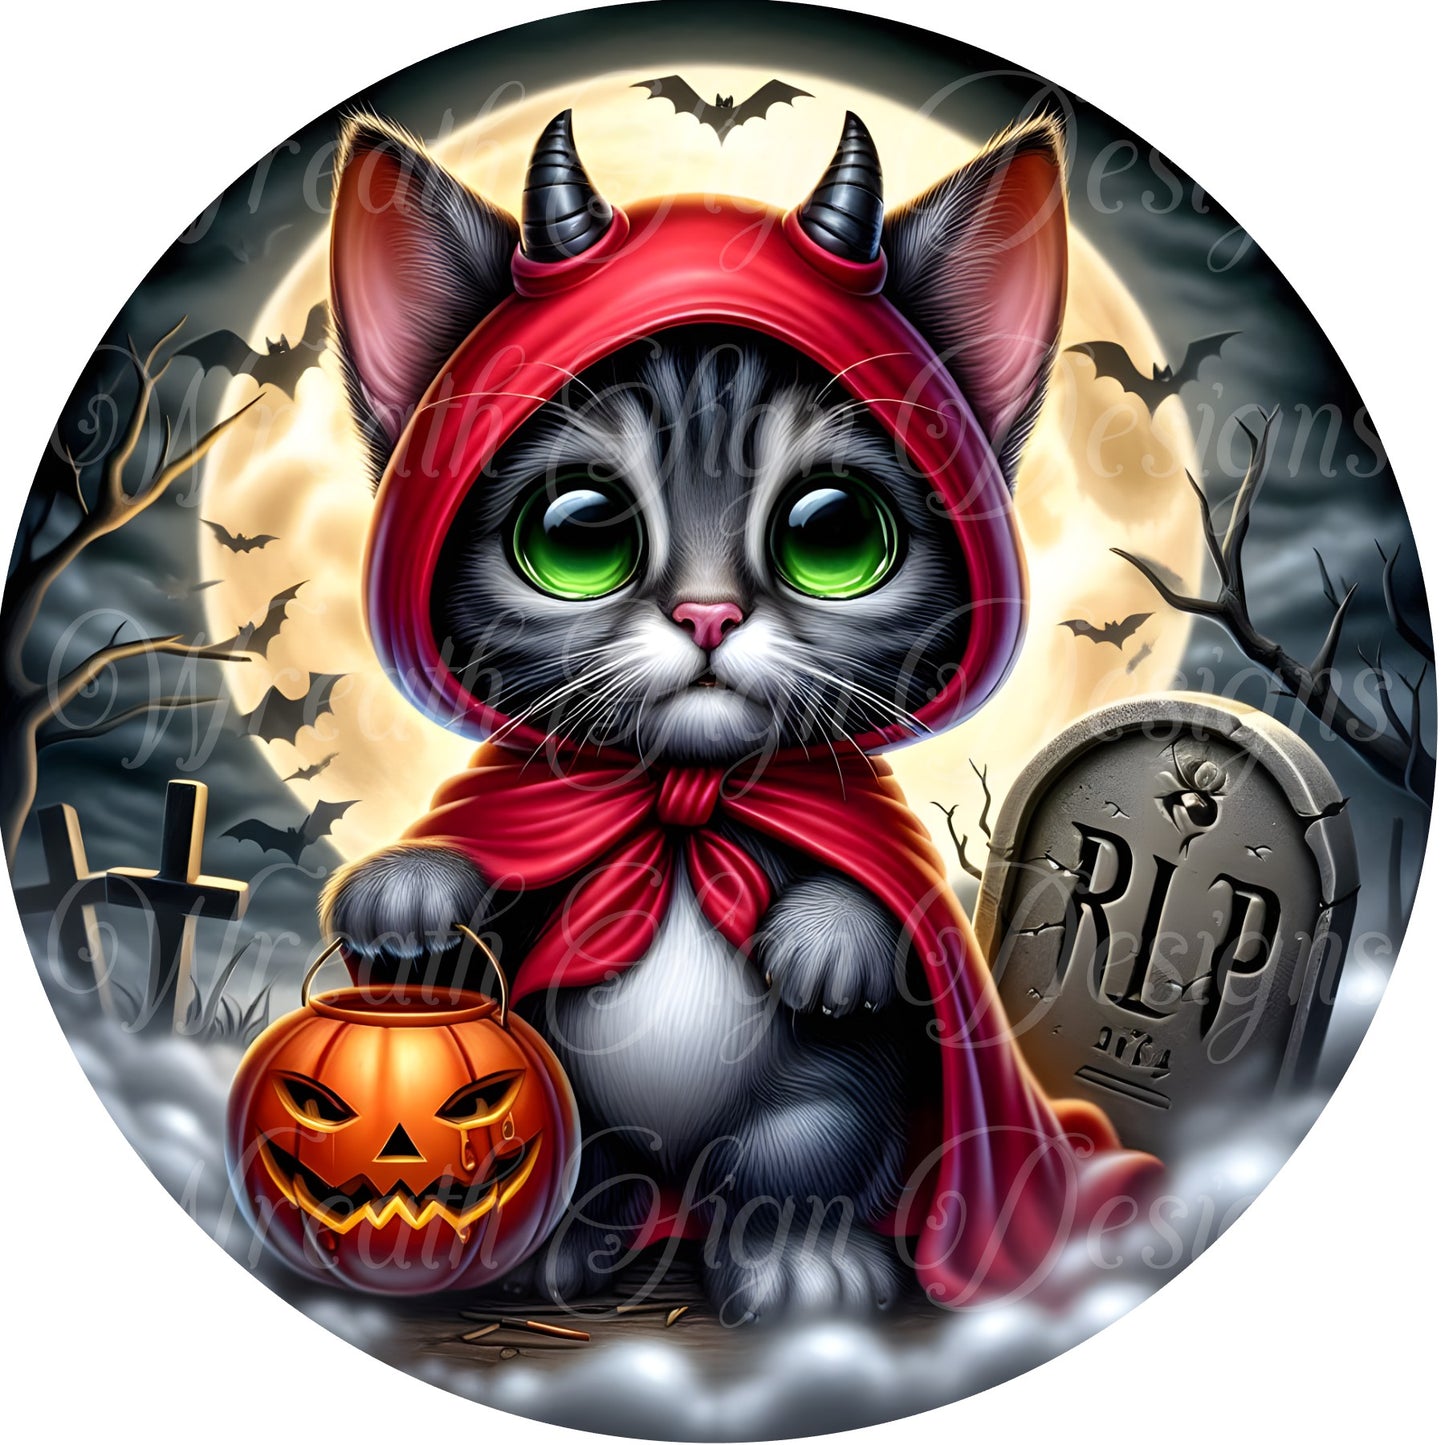 Devil witch cat round metal sign, Halloween cat wreath sign, black and purple wreath center, wreath attachment